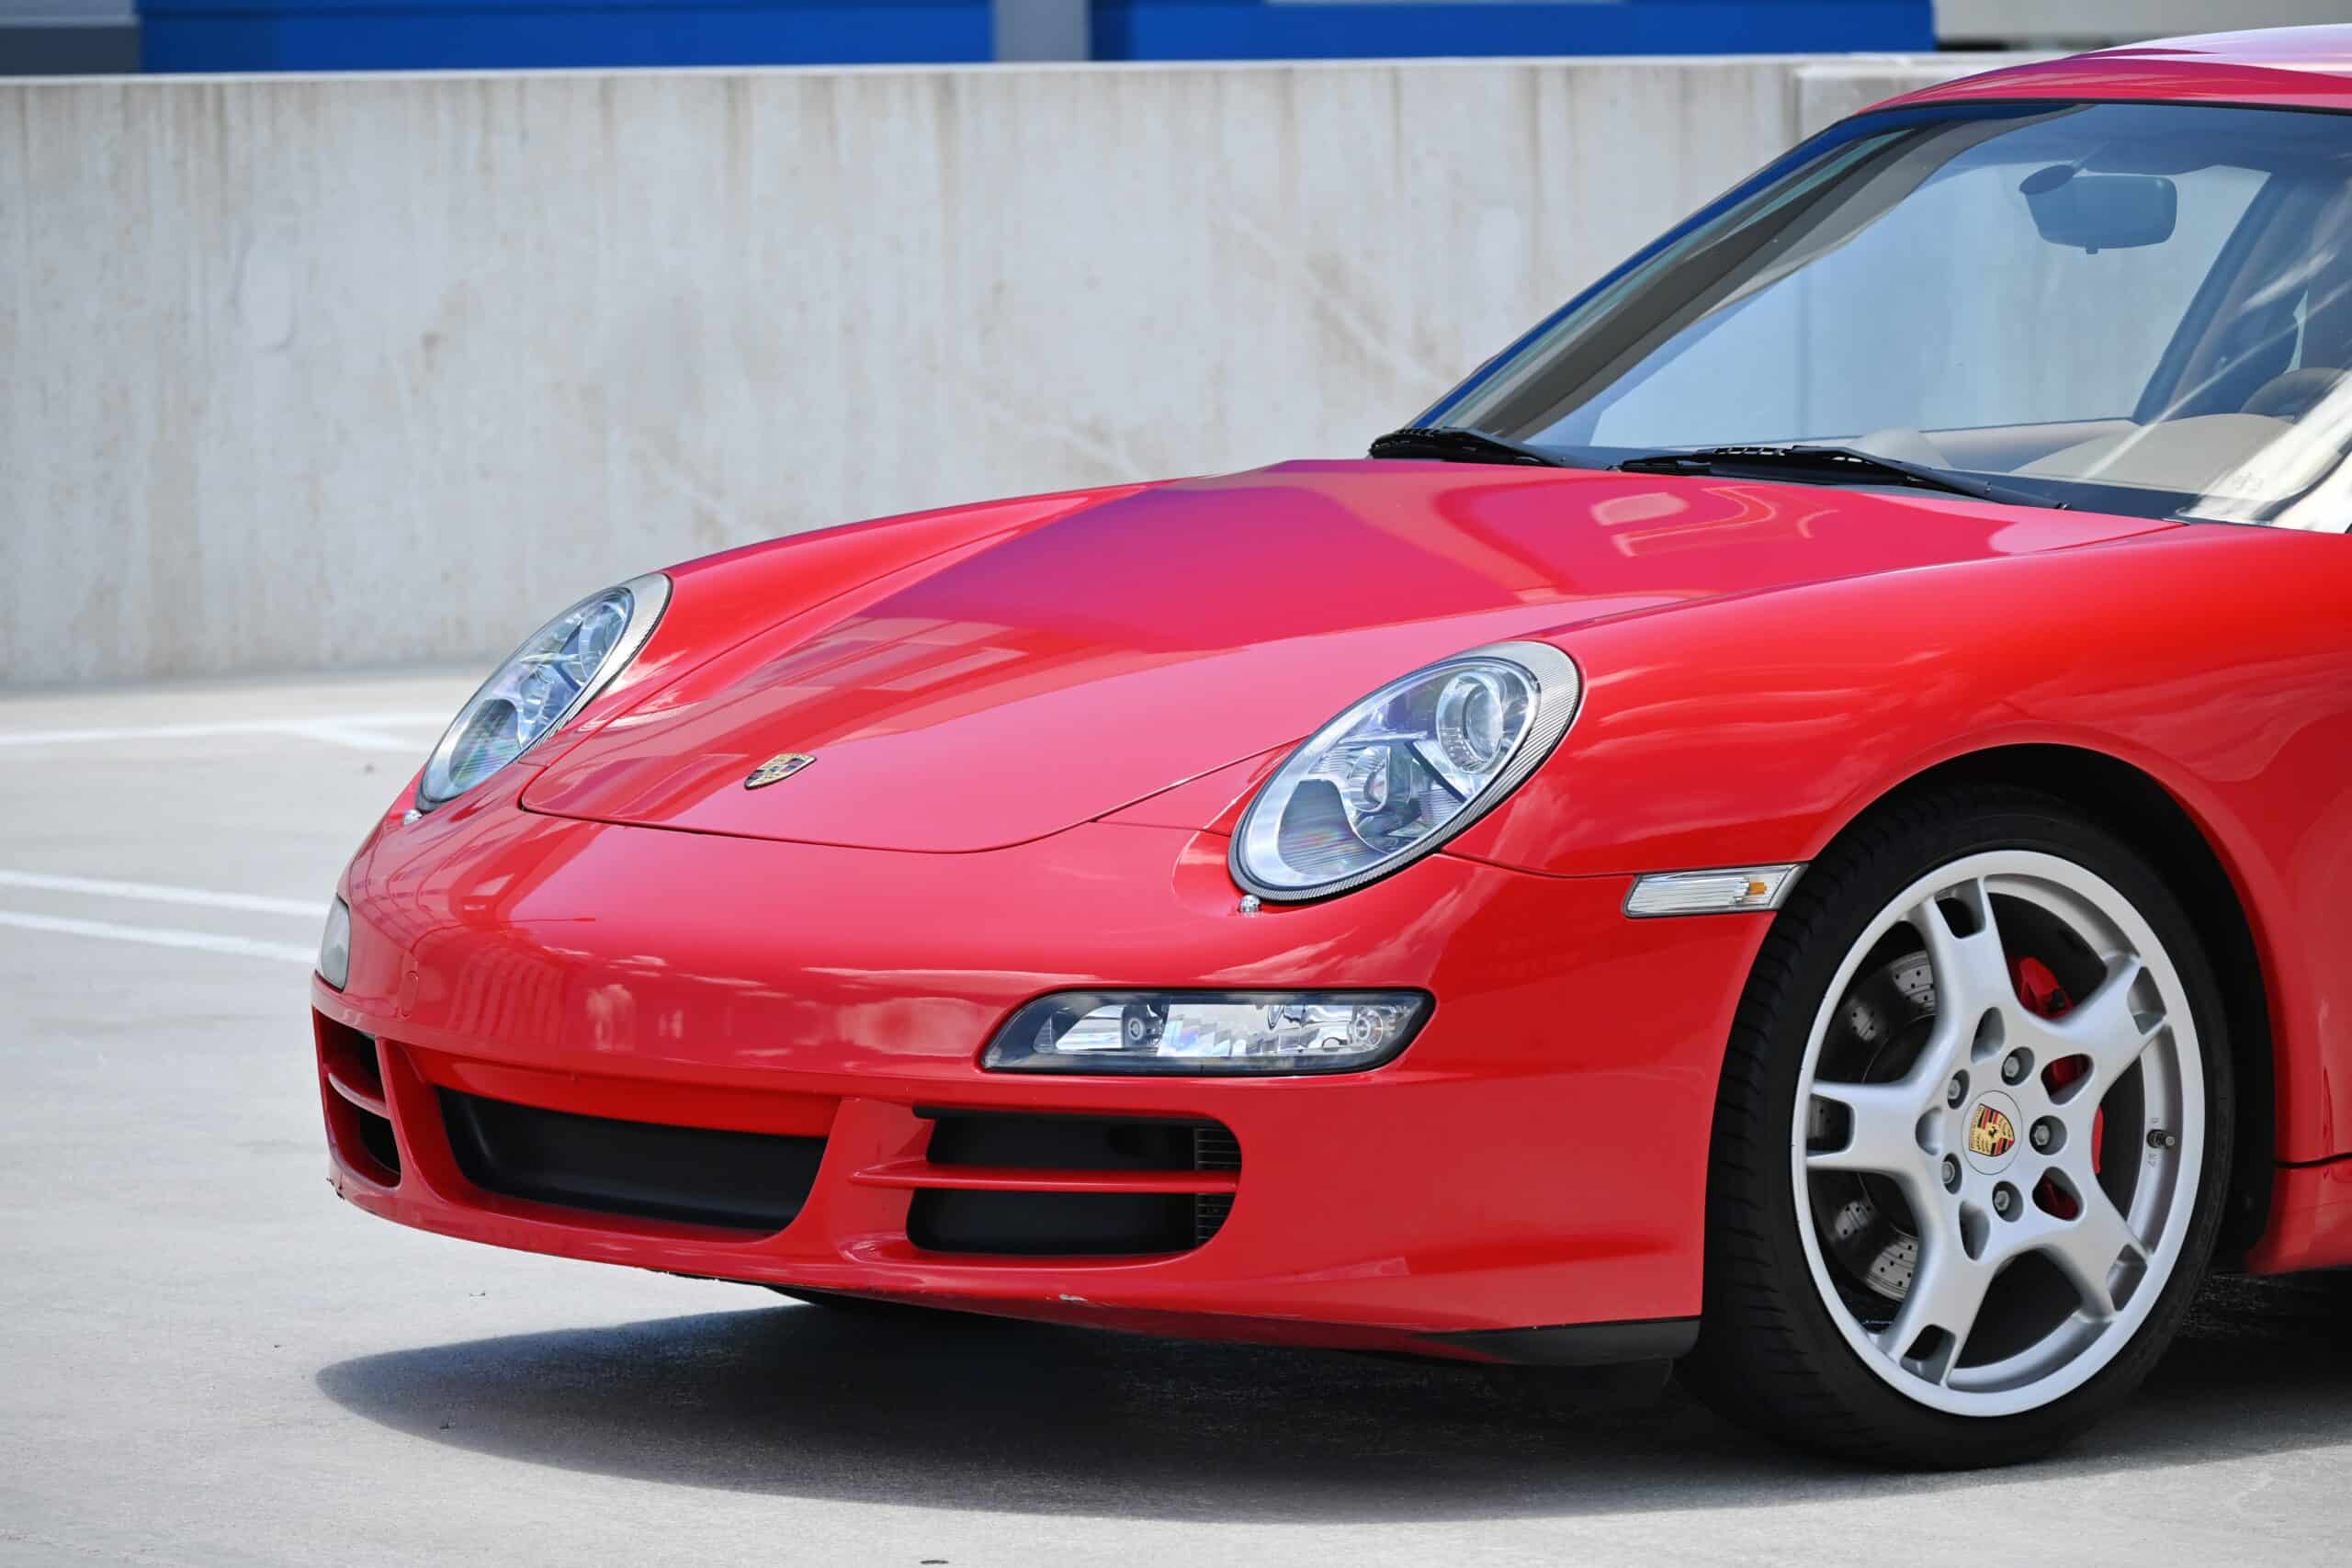 2007 Porsche 911 997.1 Carrera S 3.8L 6 SPEED MANUAL -CLEAN HISTORY – ALL ORIGINAL AND ALL STOCK